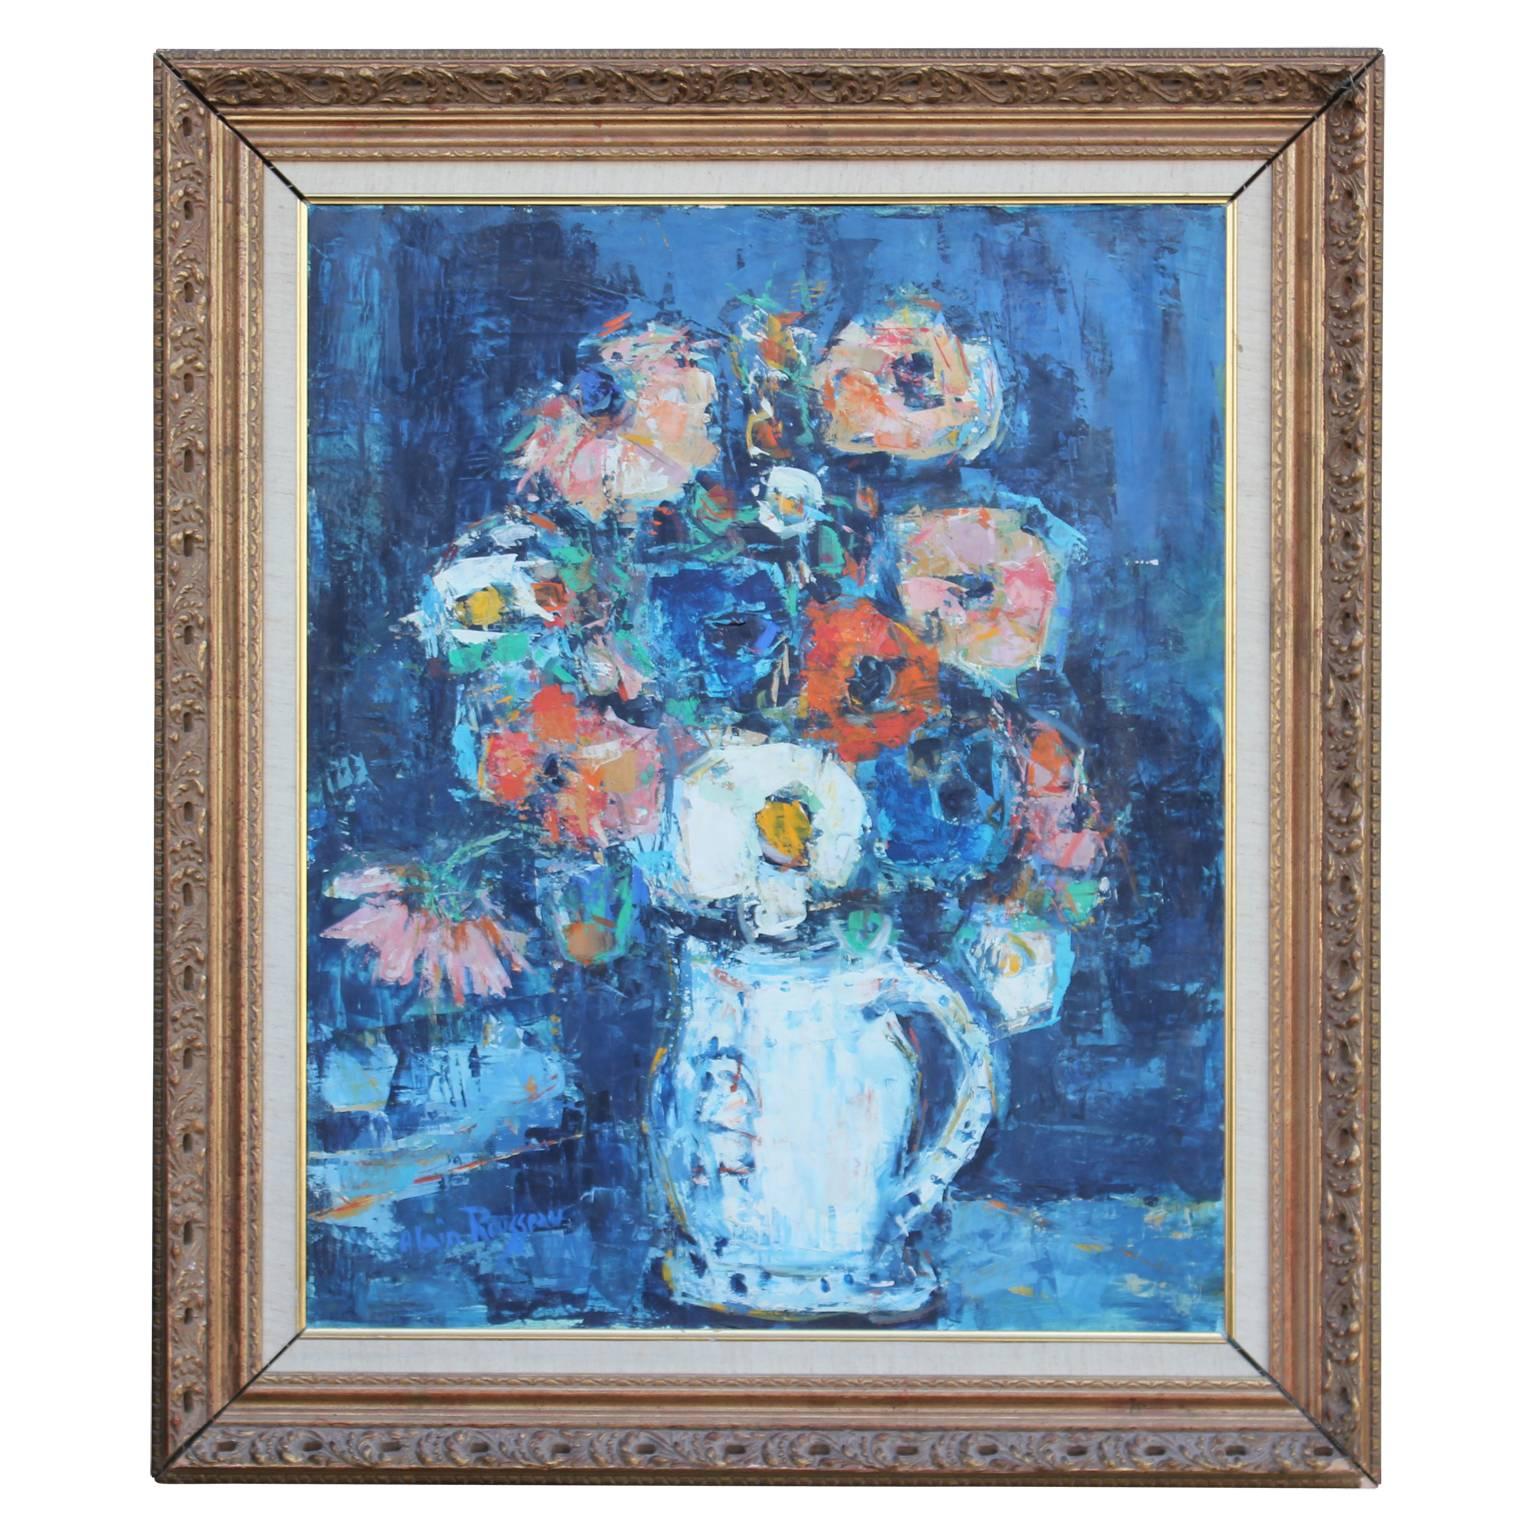 Alain Rousseau Interior Painting - Impressionist Flowers in Vase Still Life with Blue Hues